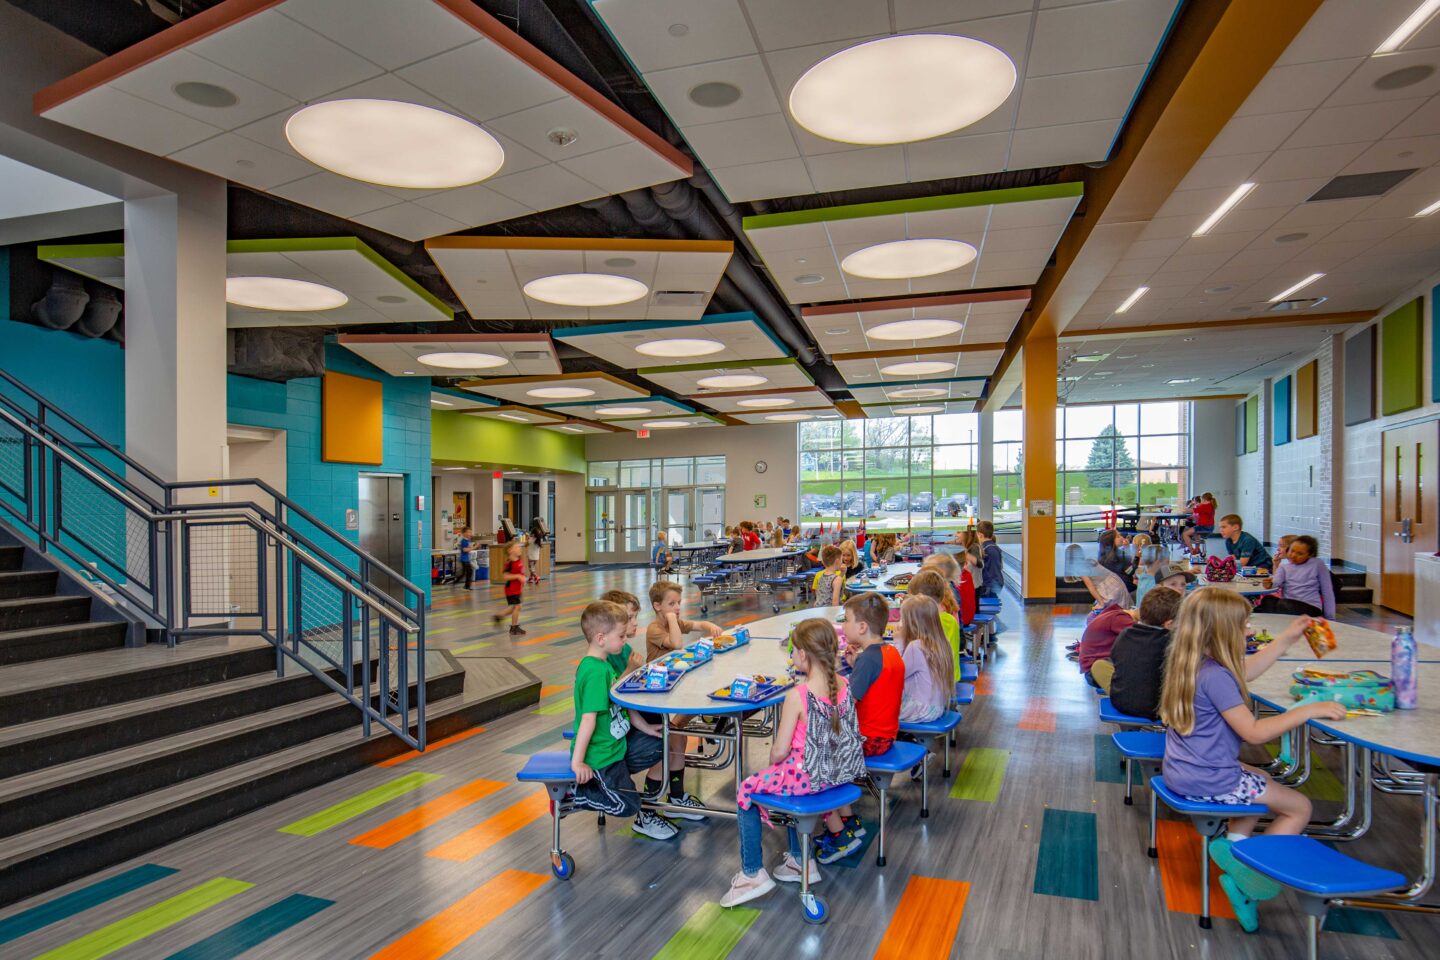 A wide staircase opens into a colorful cafeteria with a wall of windows providing natural light at Belleville Intermediate School